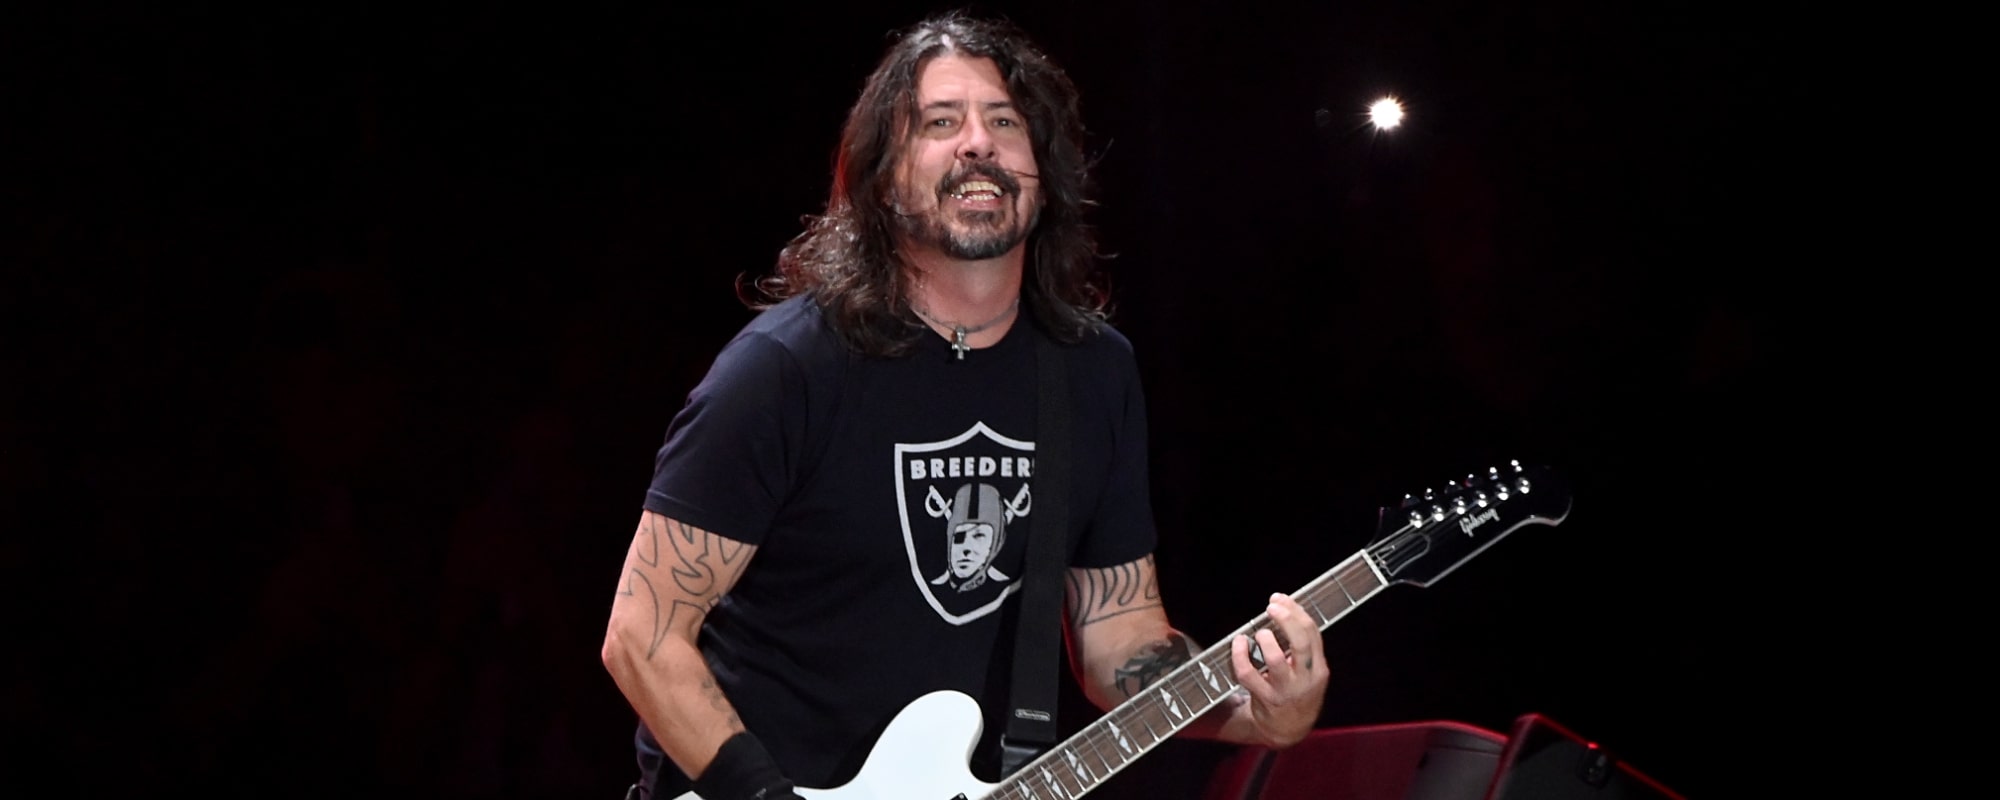 There Goes Our Hero: Dave Grohl Spent Super Bowl Sunday Barbecuing for Unhoused People in California